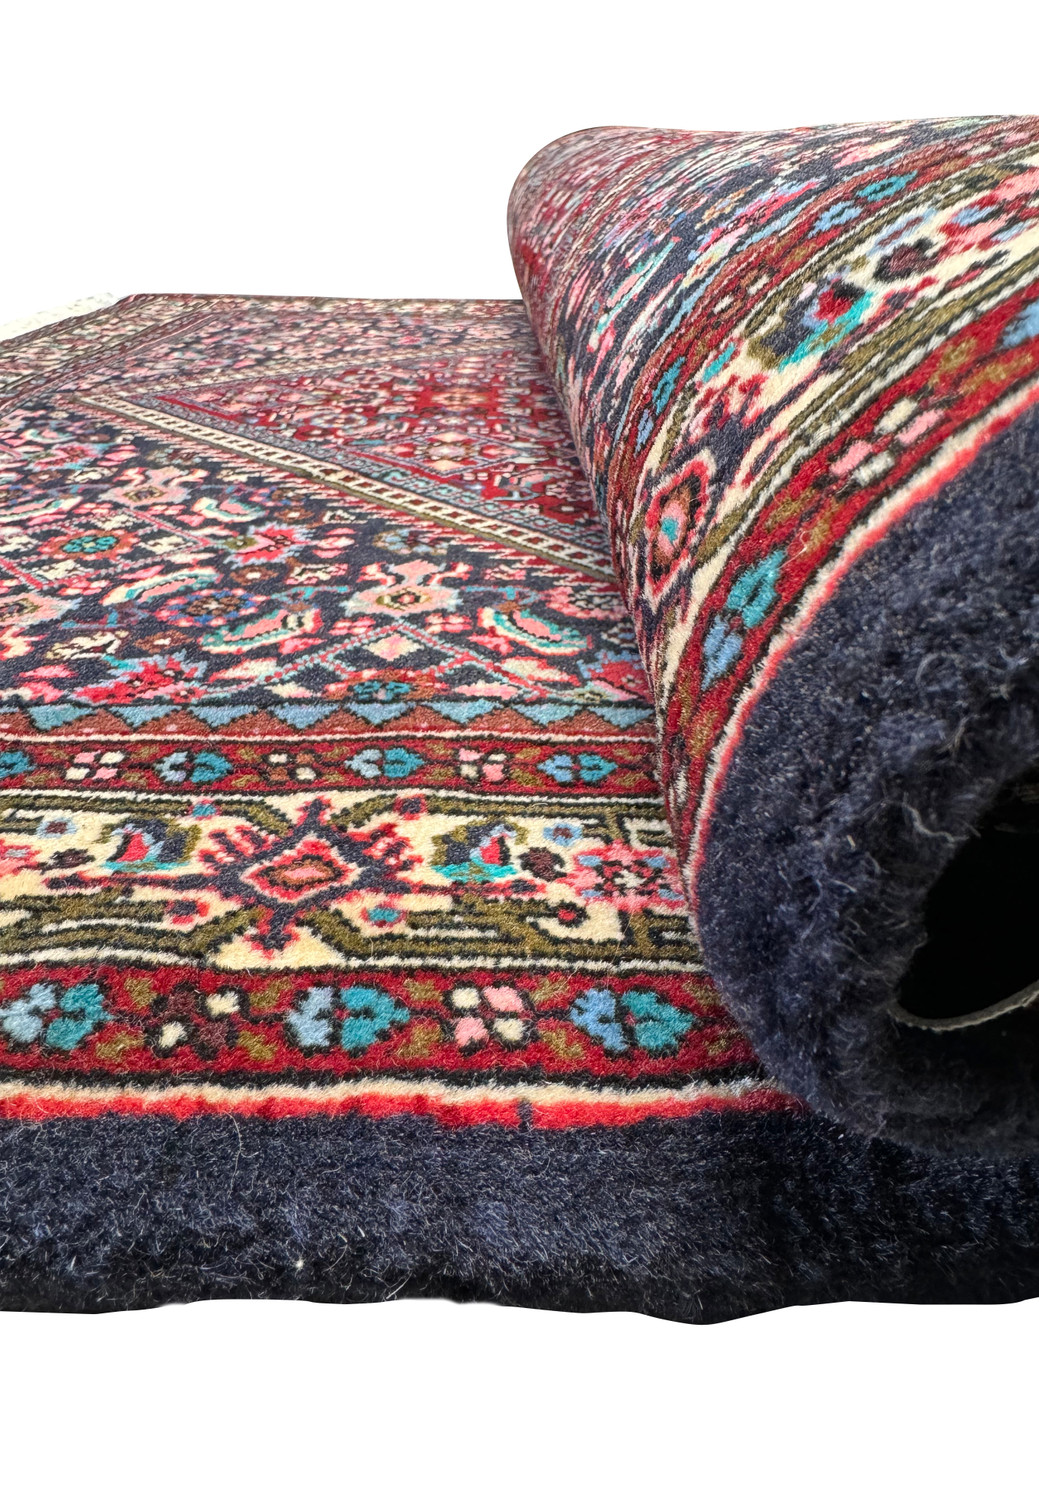 Perspective shot of the Persian Bijar Rug, illustrating the dense texture and quality of the woo